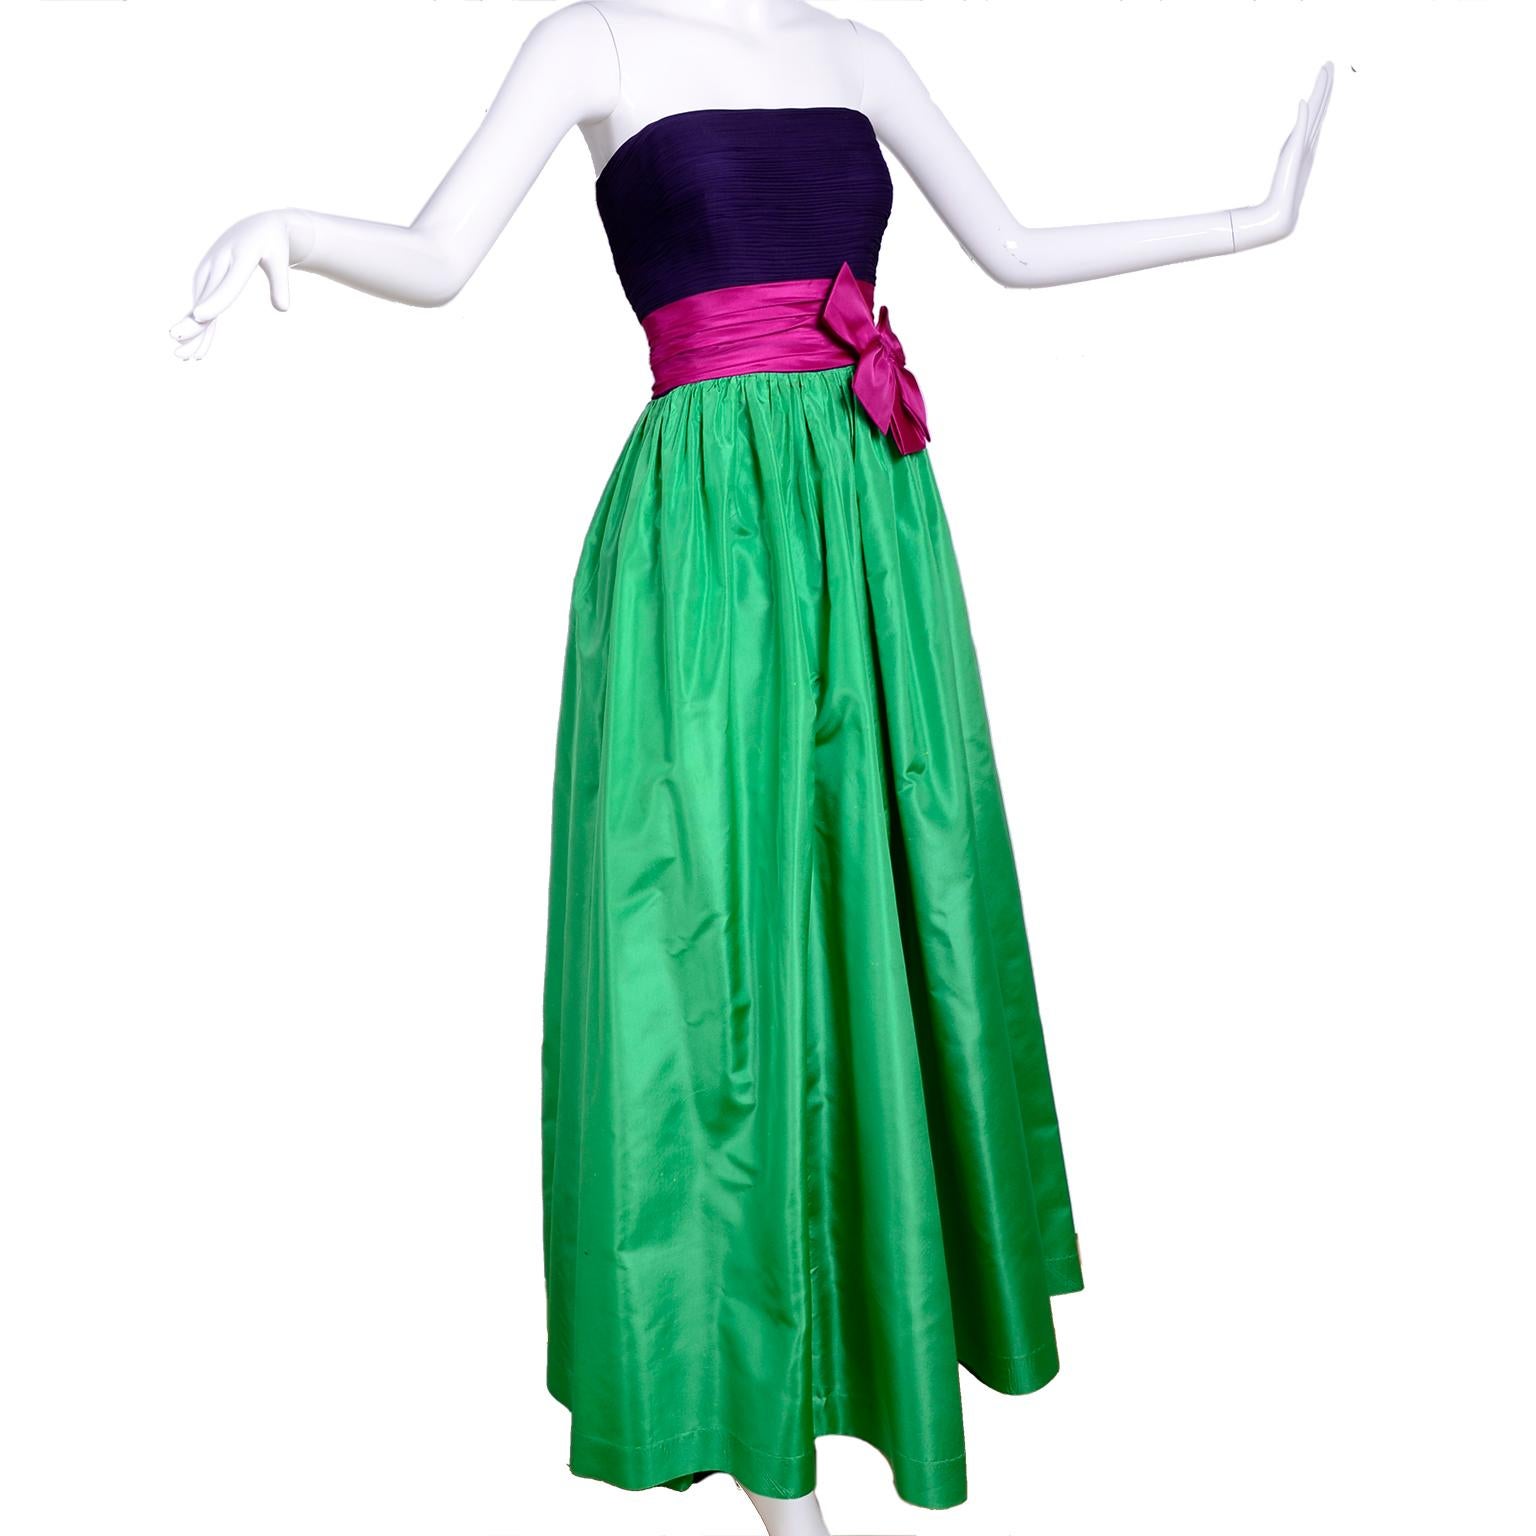 This is a beautiful Nina Ricci strapless evening gown with a ruched deep purple silk strapless bodice. The skirt is fully lined and there is a pink satin belt with an attached bow at the waist. This is a lovely vintage dress that would be perfect